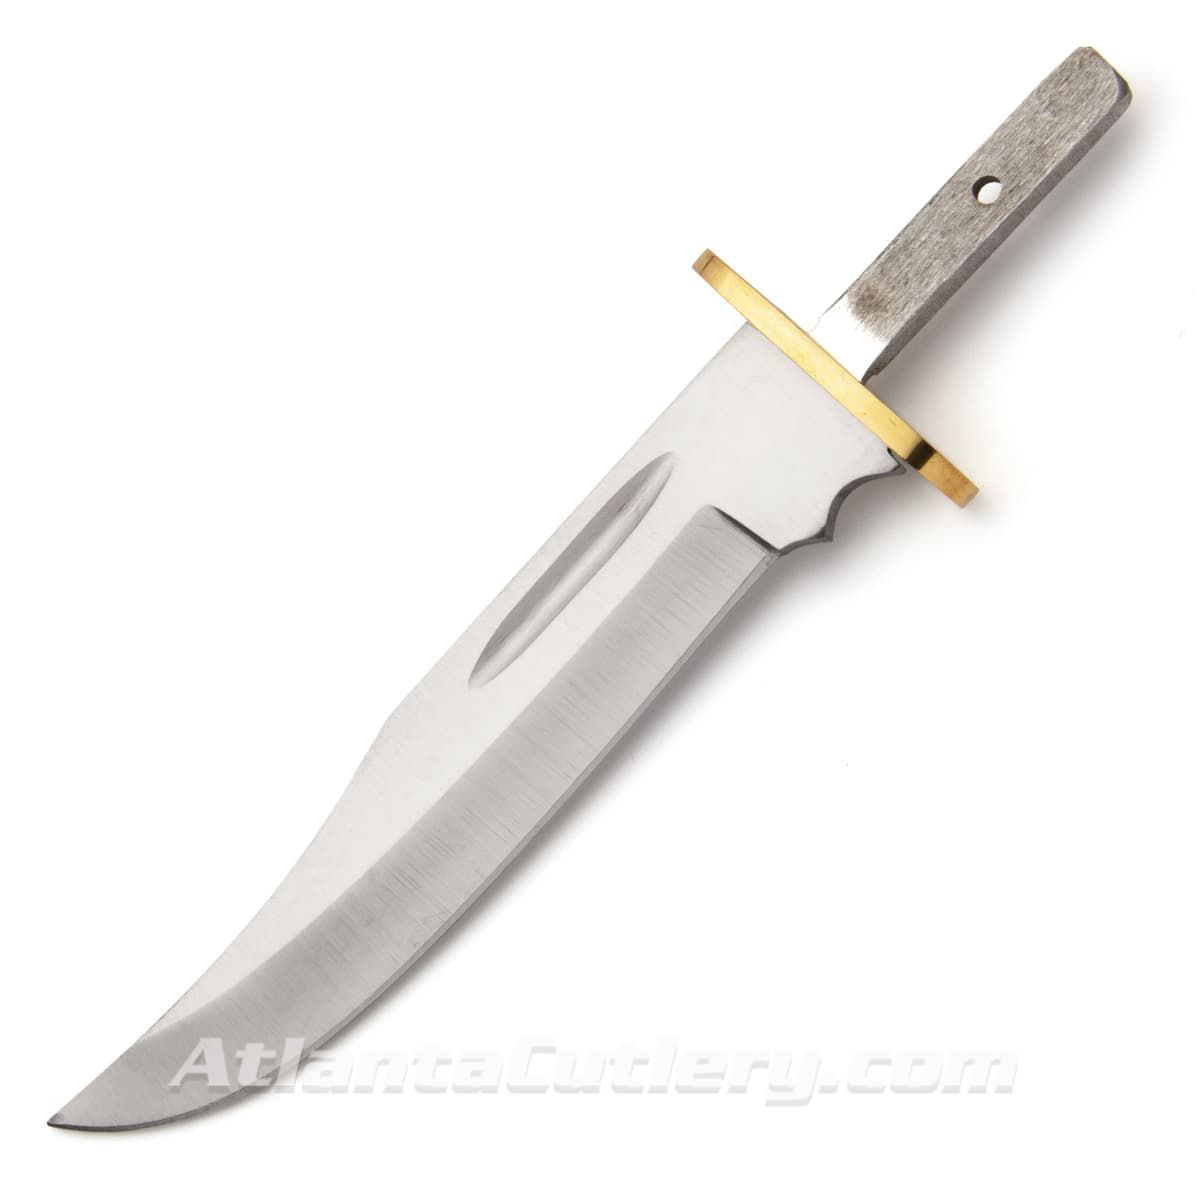 stainless steel California Clip Point Skinner Blade knife blank is sharp, has solid brass guard, and is pre drilled for pin